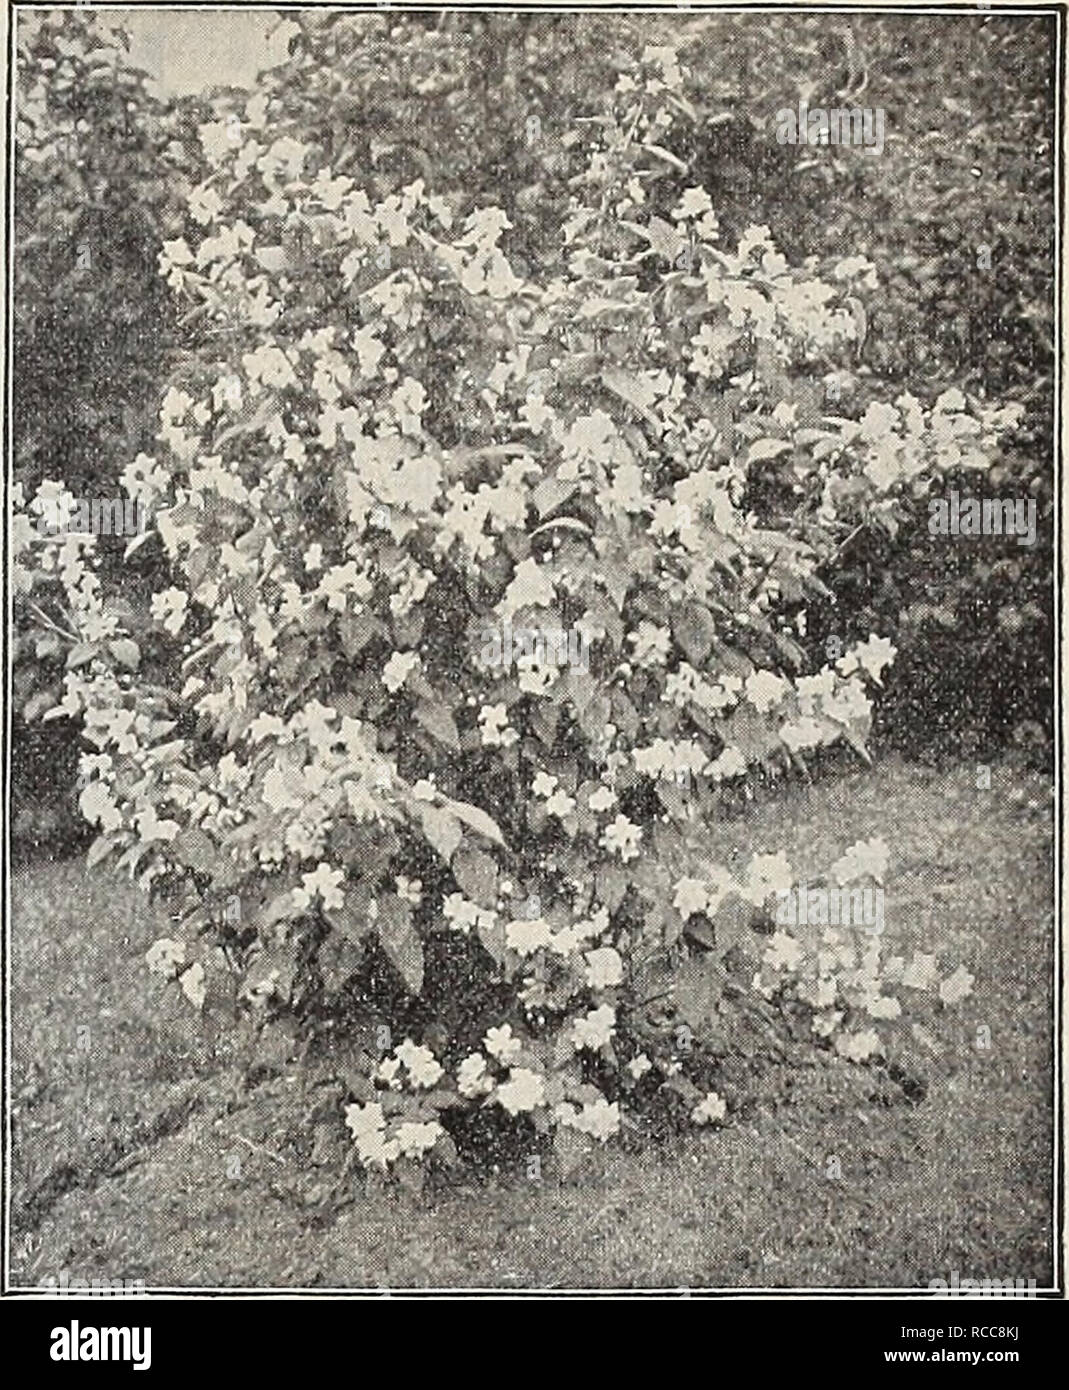 . Dreer's 1907 garden book. Seeds Catalogs; Nursery stock Catalogs; Gardening Equipment and supplies Catalogs; Flowers Seeds Catalogs; Vegetables Seeds Catalogs; Fruit Seeds Catalogs. fPffUBBfADRM PHILADELPHIA ¥ CHOICE HARDY SHRUBS 193 LlgUStrum Ibota. A Japanese Privet of the most beautiful character, with dark green fresh foliage, contrasting well with the prominent racemes of fragrant white flowers. 25 cts. each. — Ovalifolium Aureum Eiegantissimum {Golden'Varie- gated Privet). A beautiful golden variegated form of Privet, very effective for associating with other shrubs. 25 cts. each. Loni Stock Photo